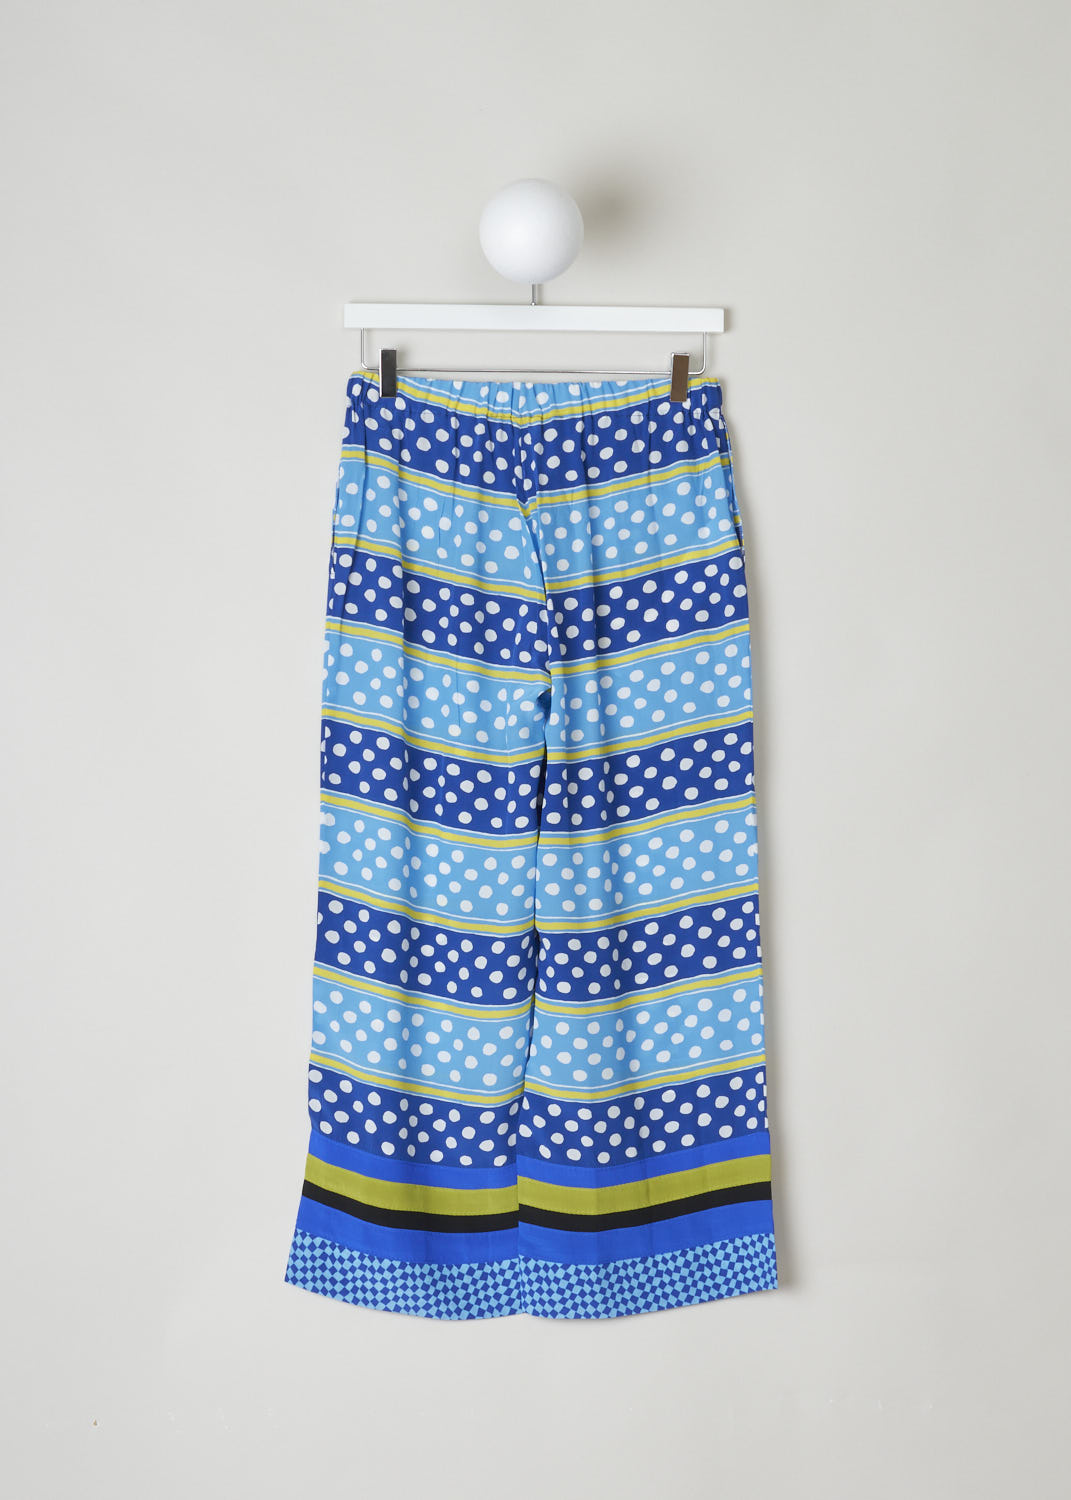 MARNI, COLORFUL SILK DOTS AND STRIPES PANTS, PAMA0304Q0_UTSF75_DS57, Blue, Print, Back, This cheerfully printed silk pants features a elasticated waist with drawstrings. Two concealed slanted pockets can be found on either side. A colorful broad trim decorates the hem.
